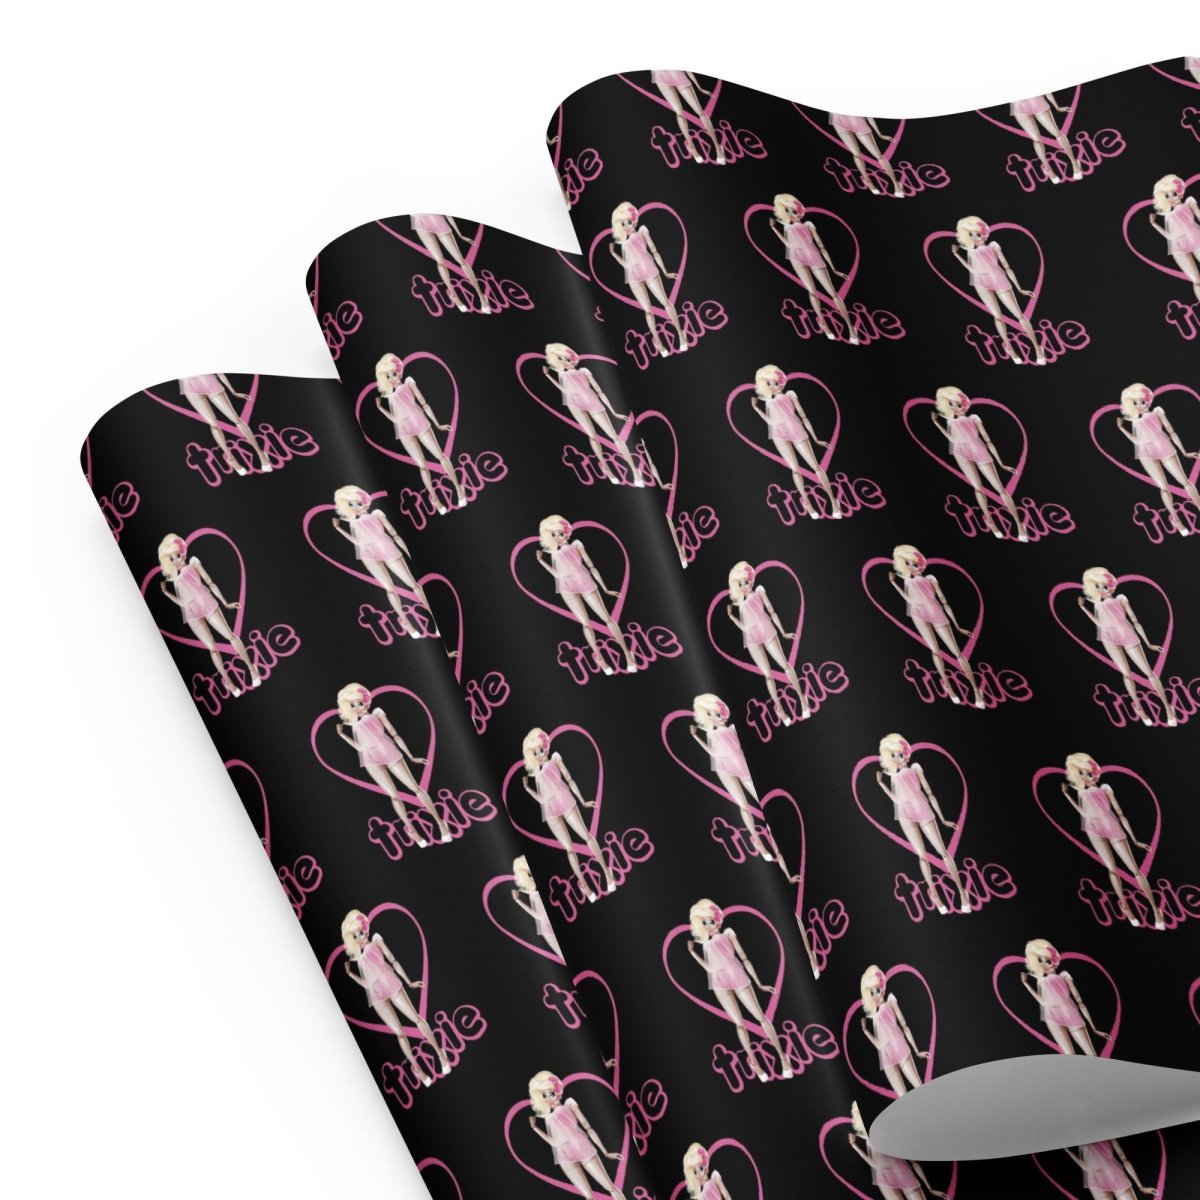 Trixie mattel - Living Doll Wrapping paper sheets - dragqueenmerch